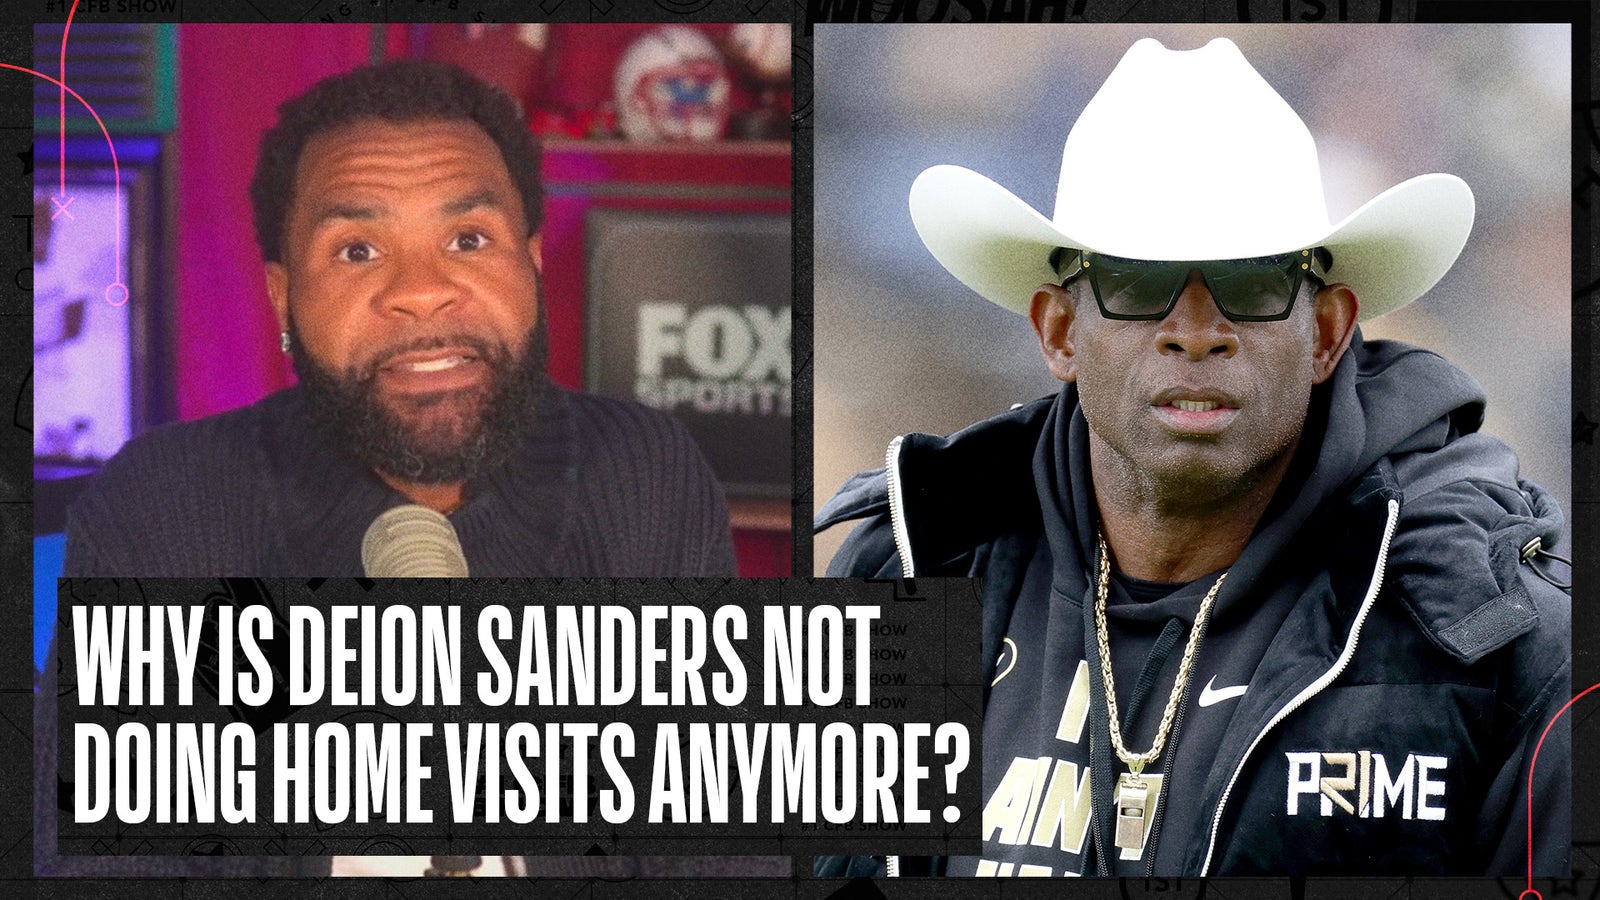 Why is Deion Sanders no longer doing in home visits for recruits?